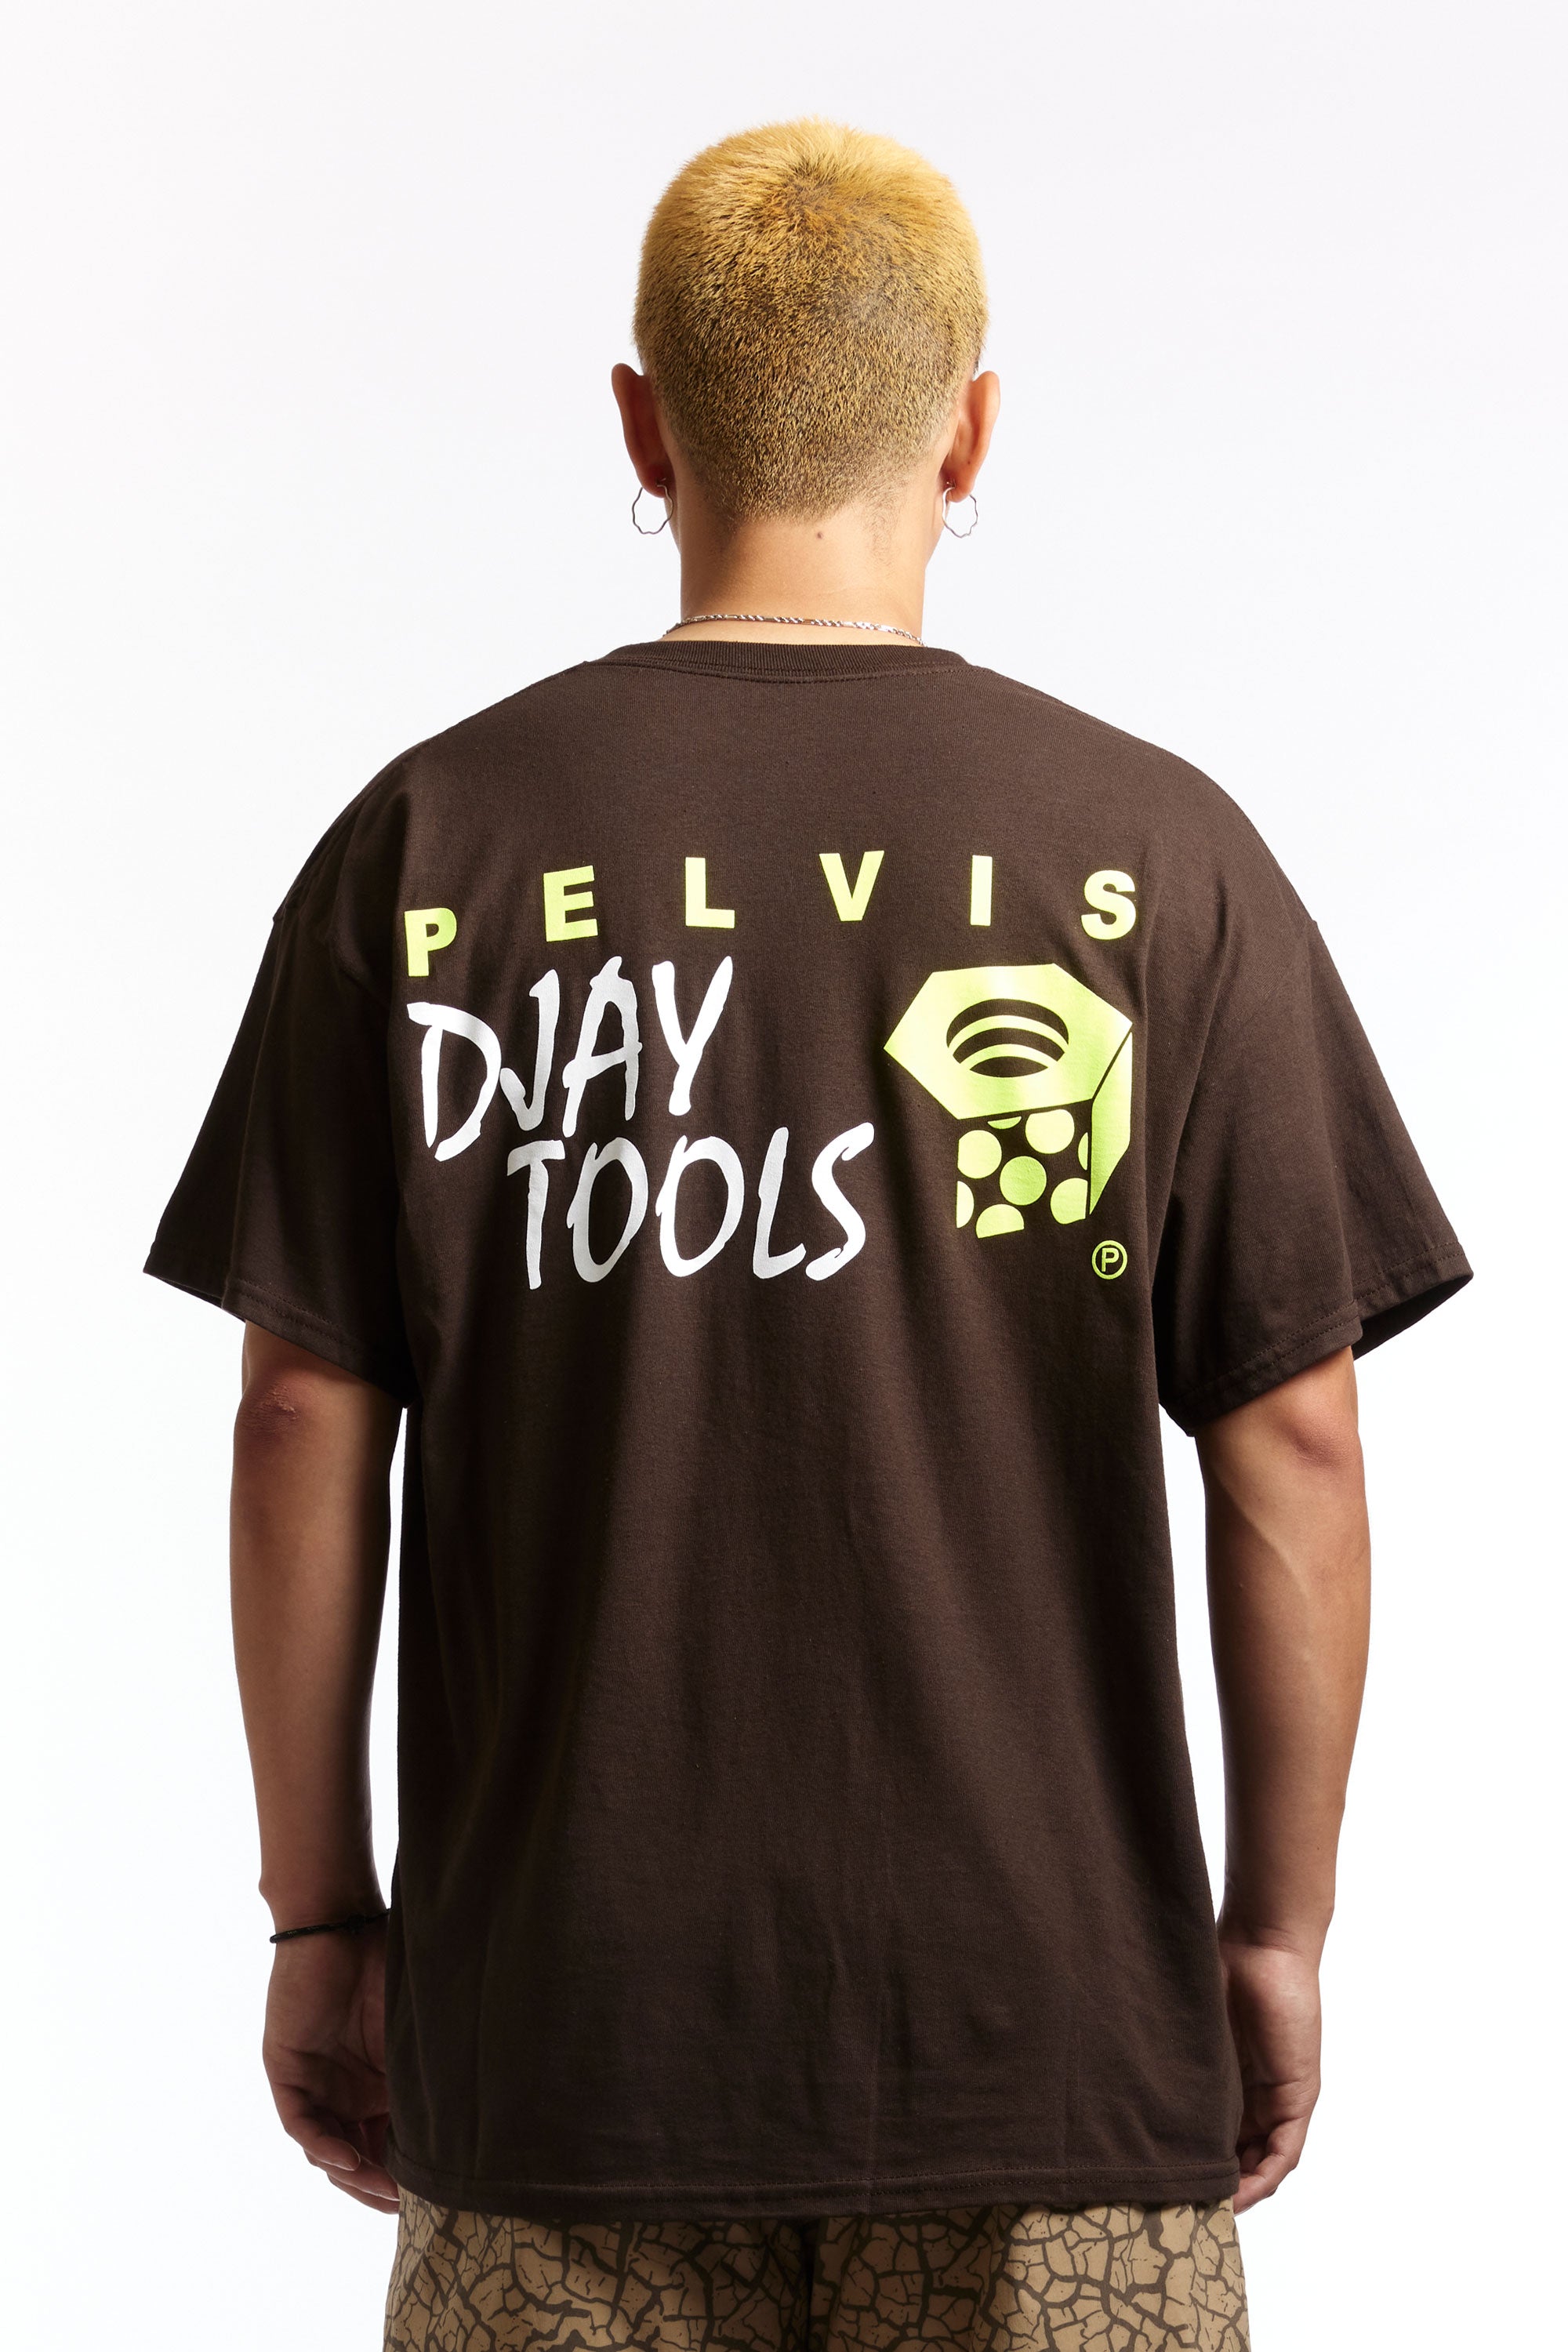 The PELVIS - DJAY TOOLS 3 TEE  available online with global shipping, and in PAM Stores Melbourne and Sydney.